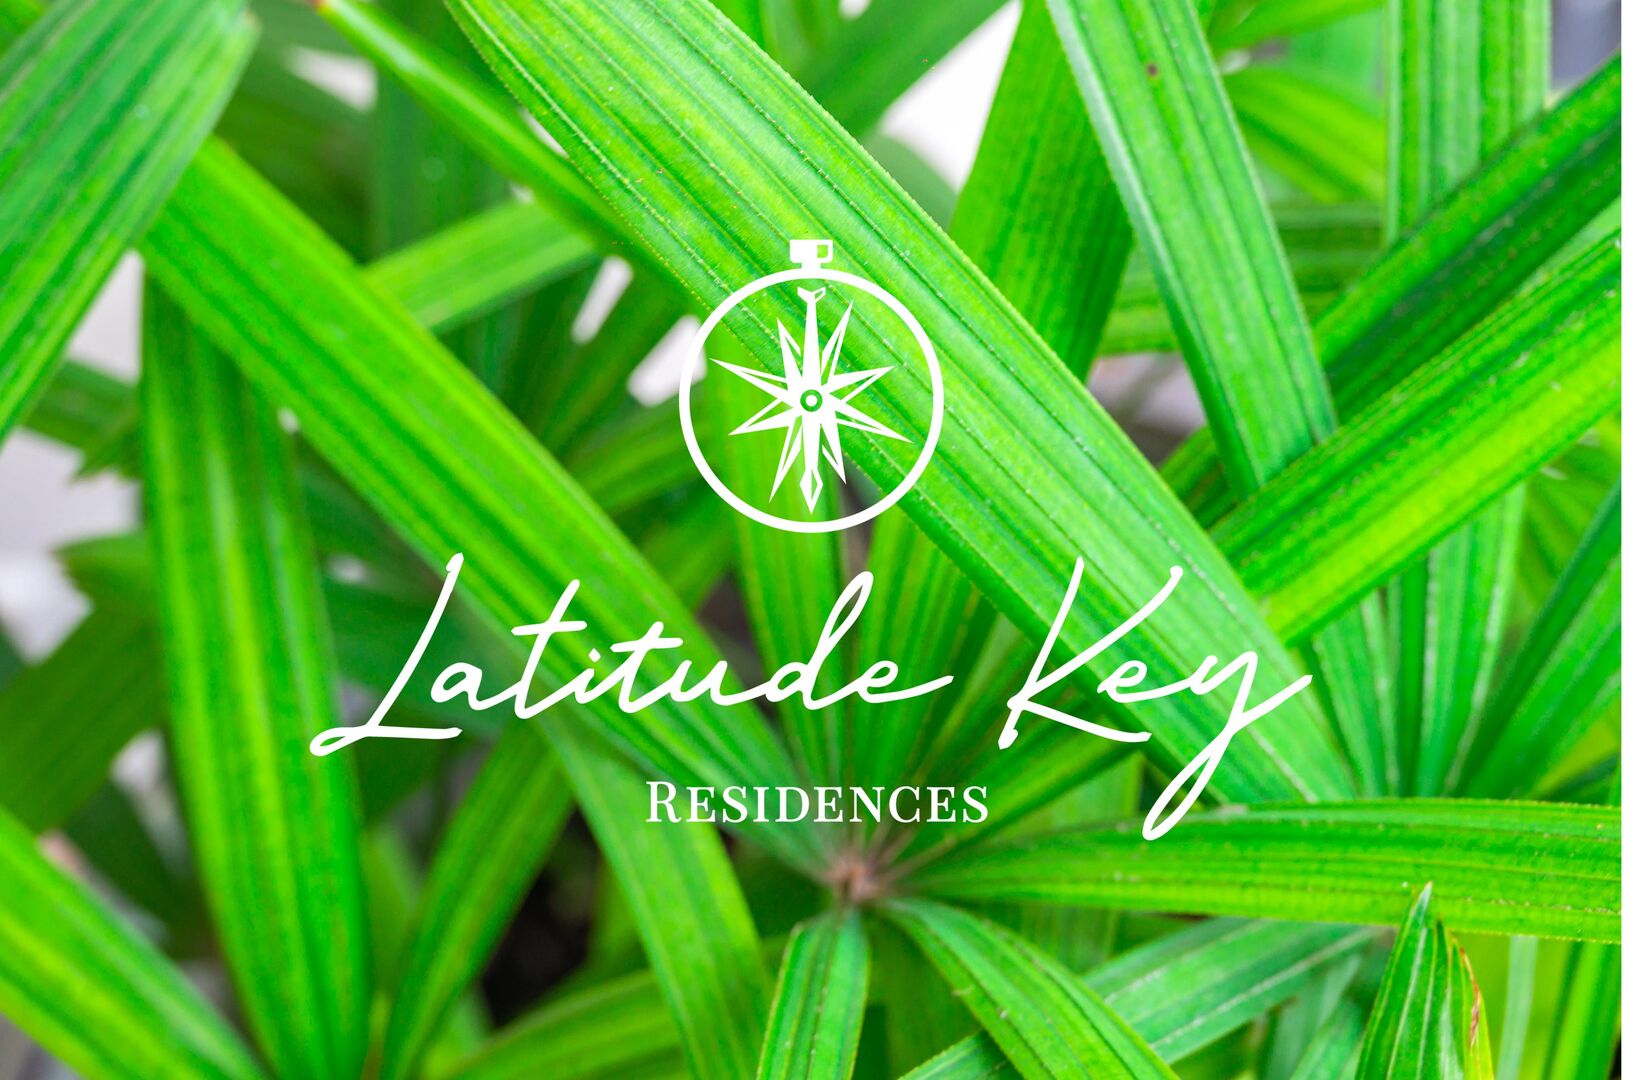 Manatee Ranch Key is part of the Residences Collection. Enjoy a stress free vacation with Latitude Key.